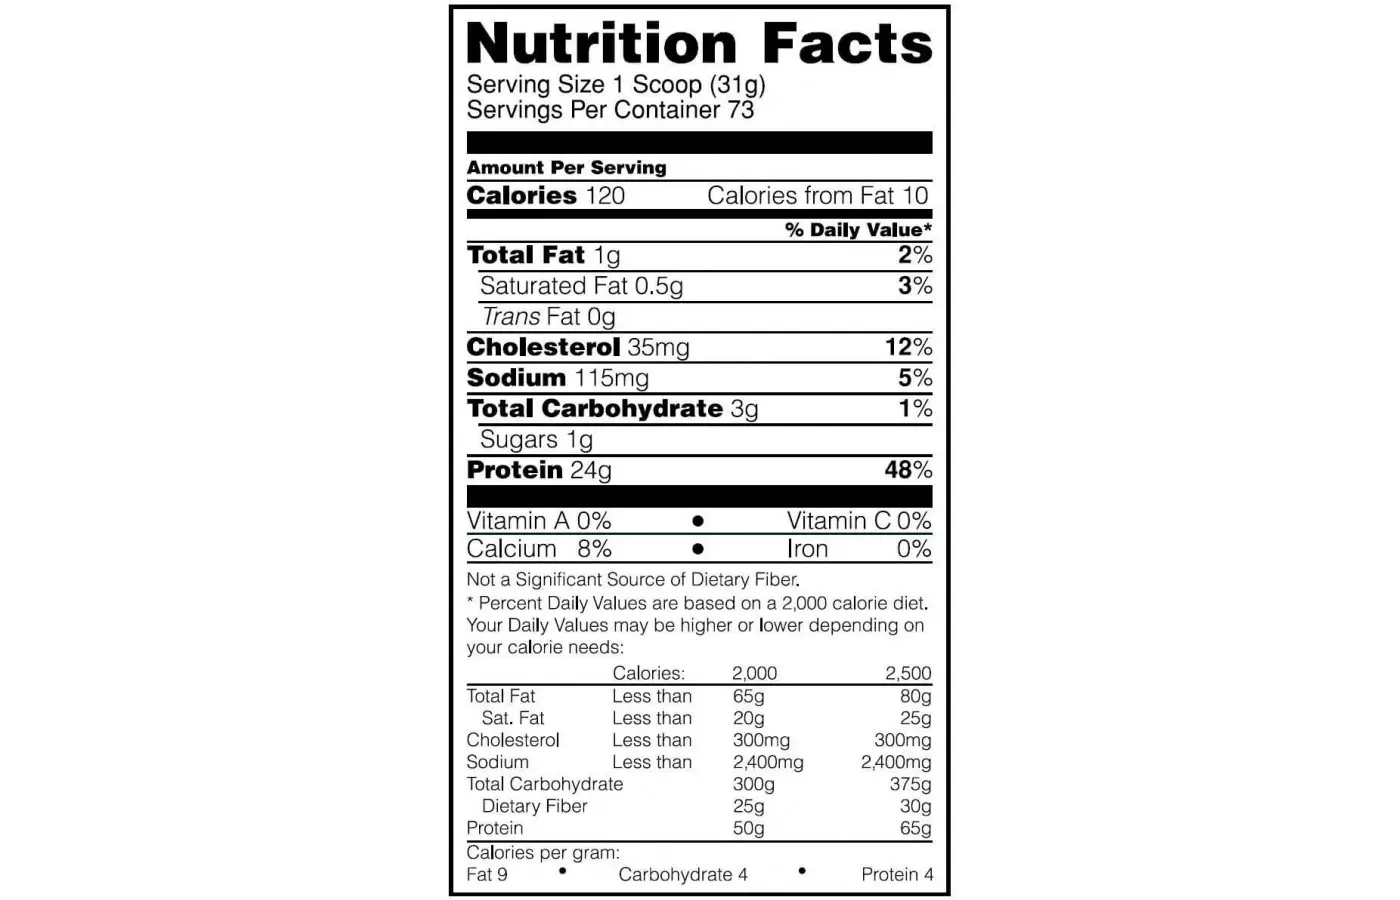 Gold Standard Nutrition facts